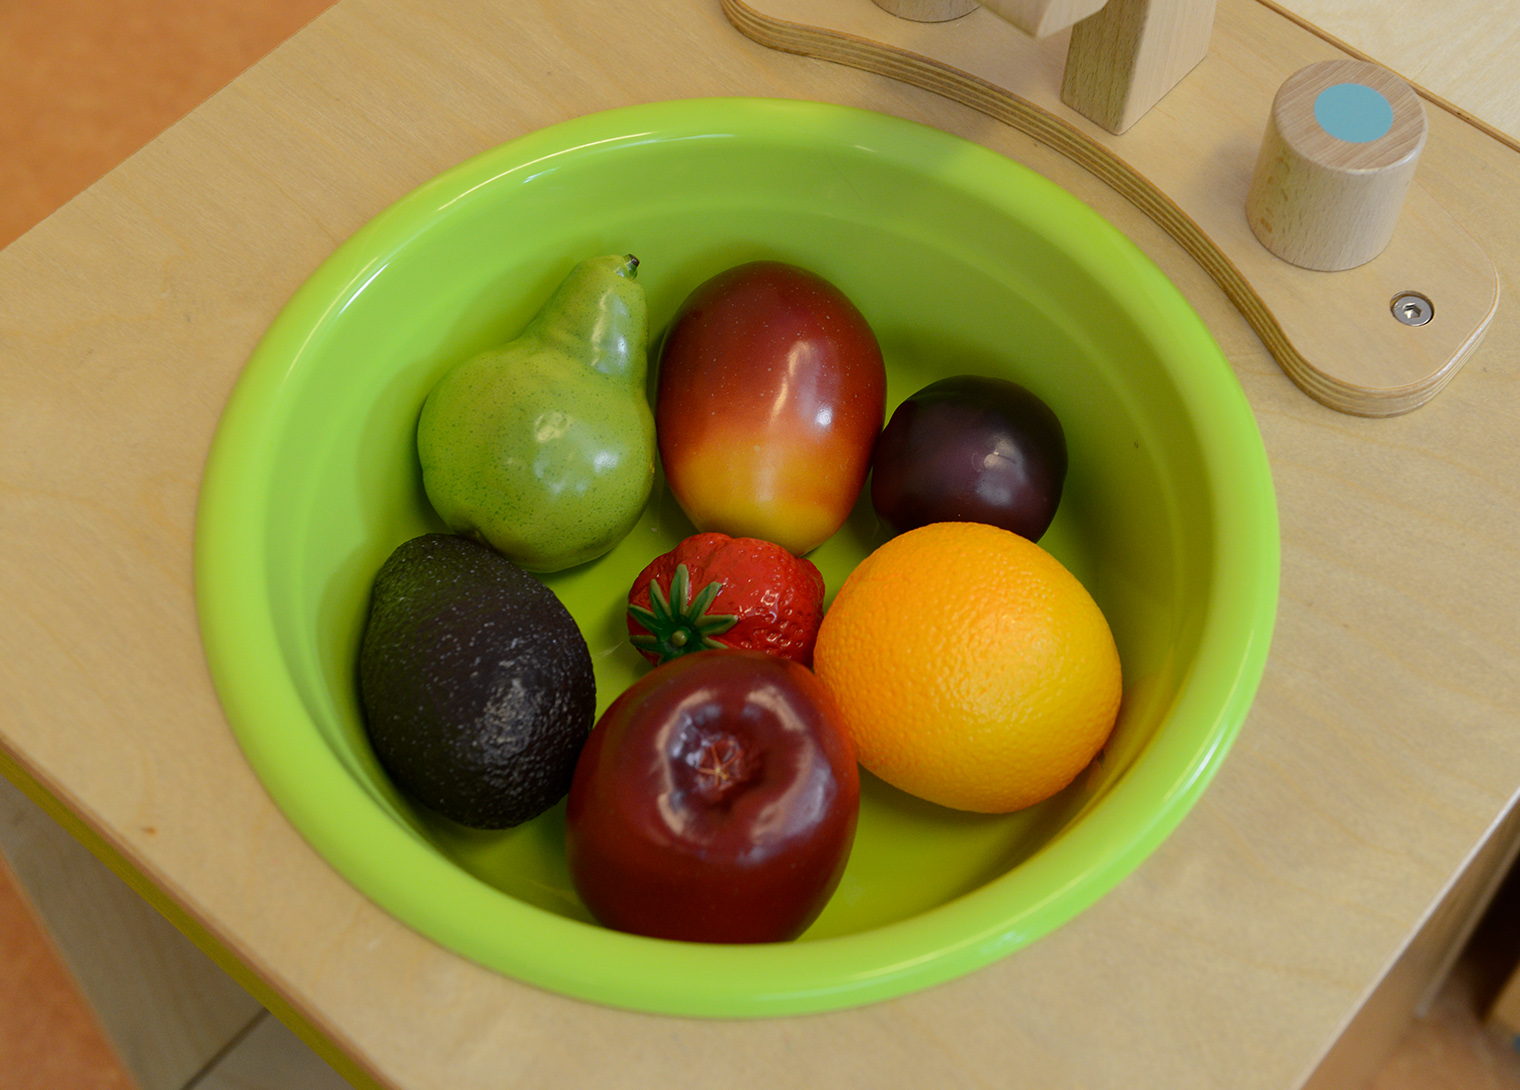 Realistic Food Toy - Fruit 